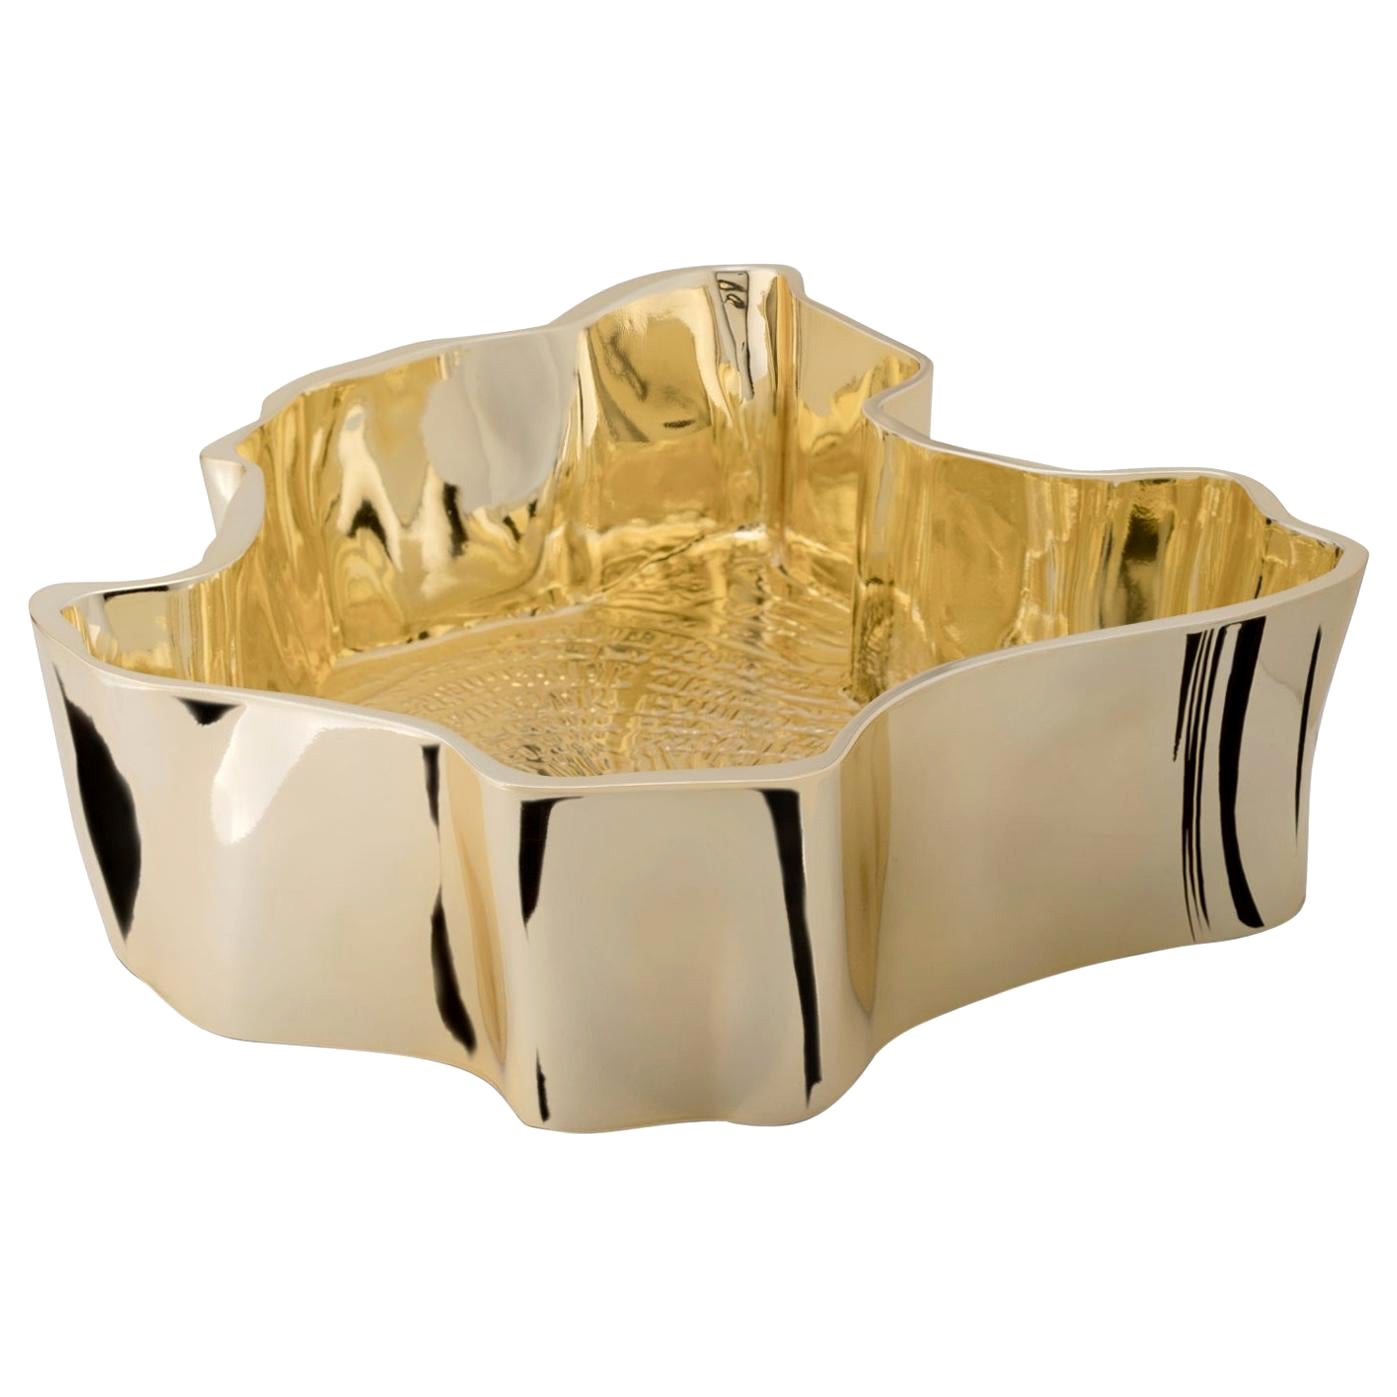 Modern Eden in Gold-Plated Vessel Sink by Maison Valentina For Sale